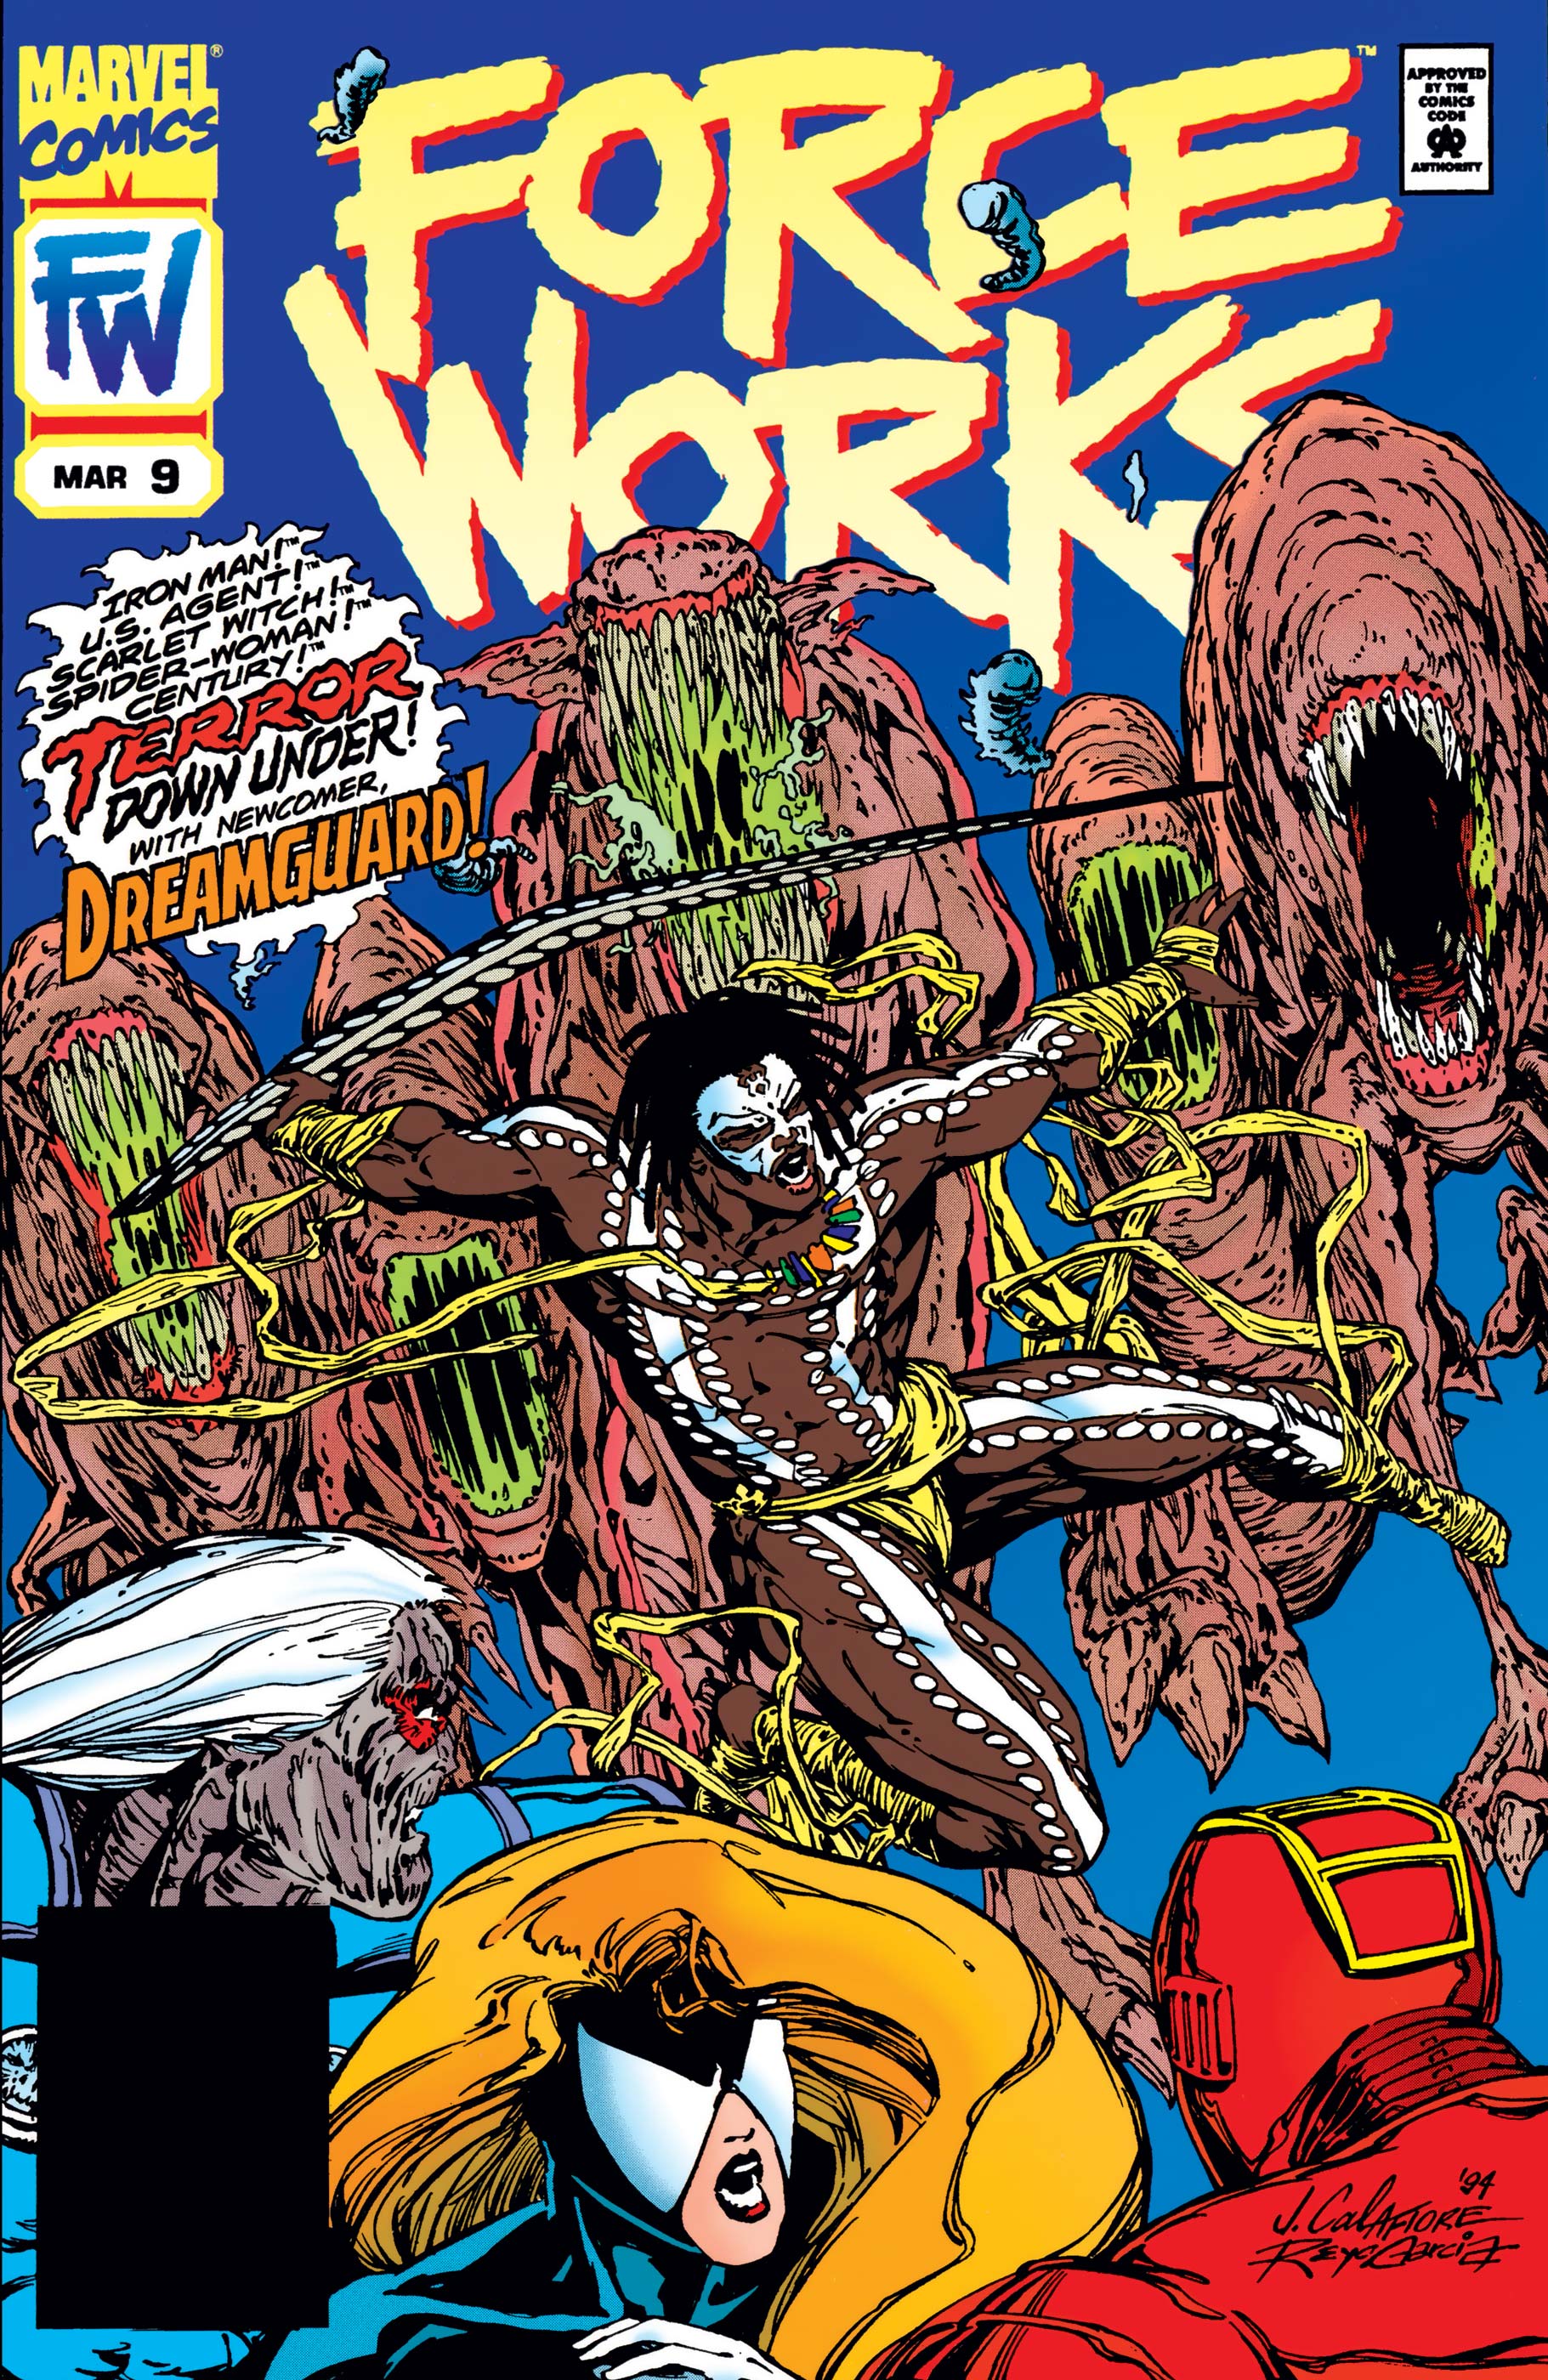 Force Works (1994) #9